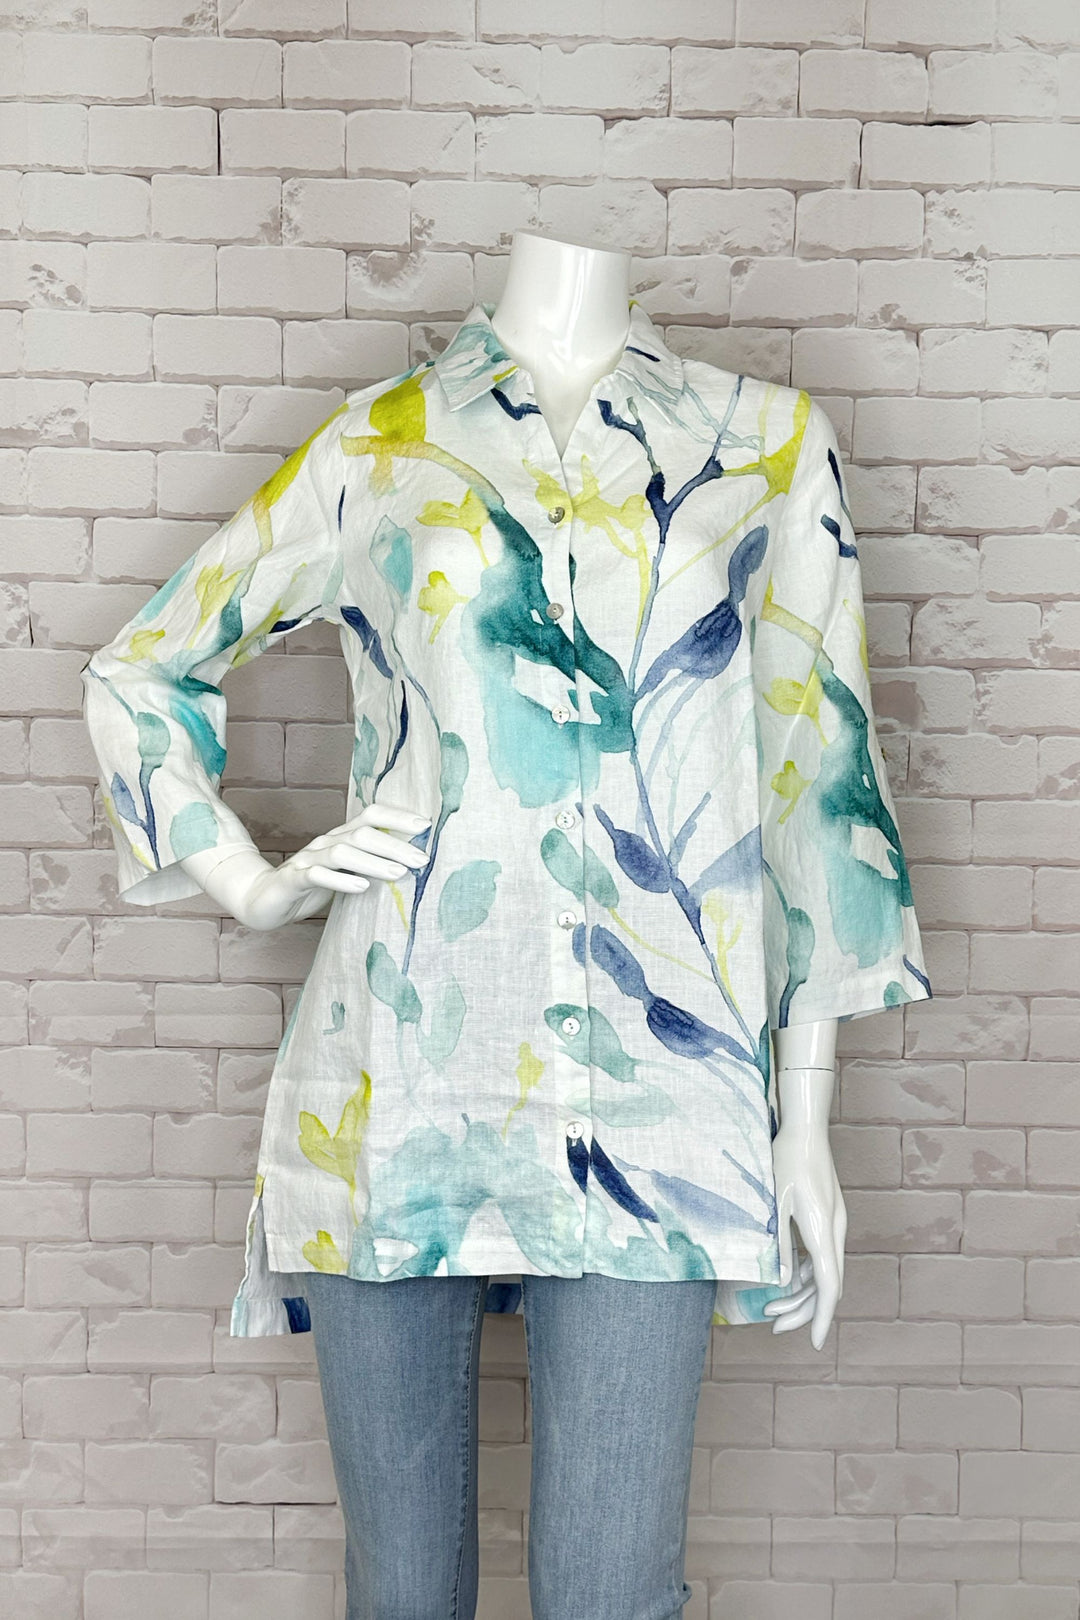 With front buttons and stylish 3/4 length sleeves, this wonderful woven blouse adds a touch of casual elegance to any outfit this spring and summer. 